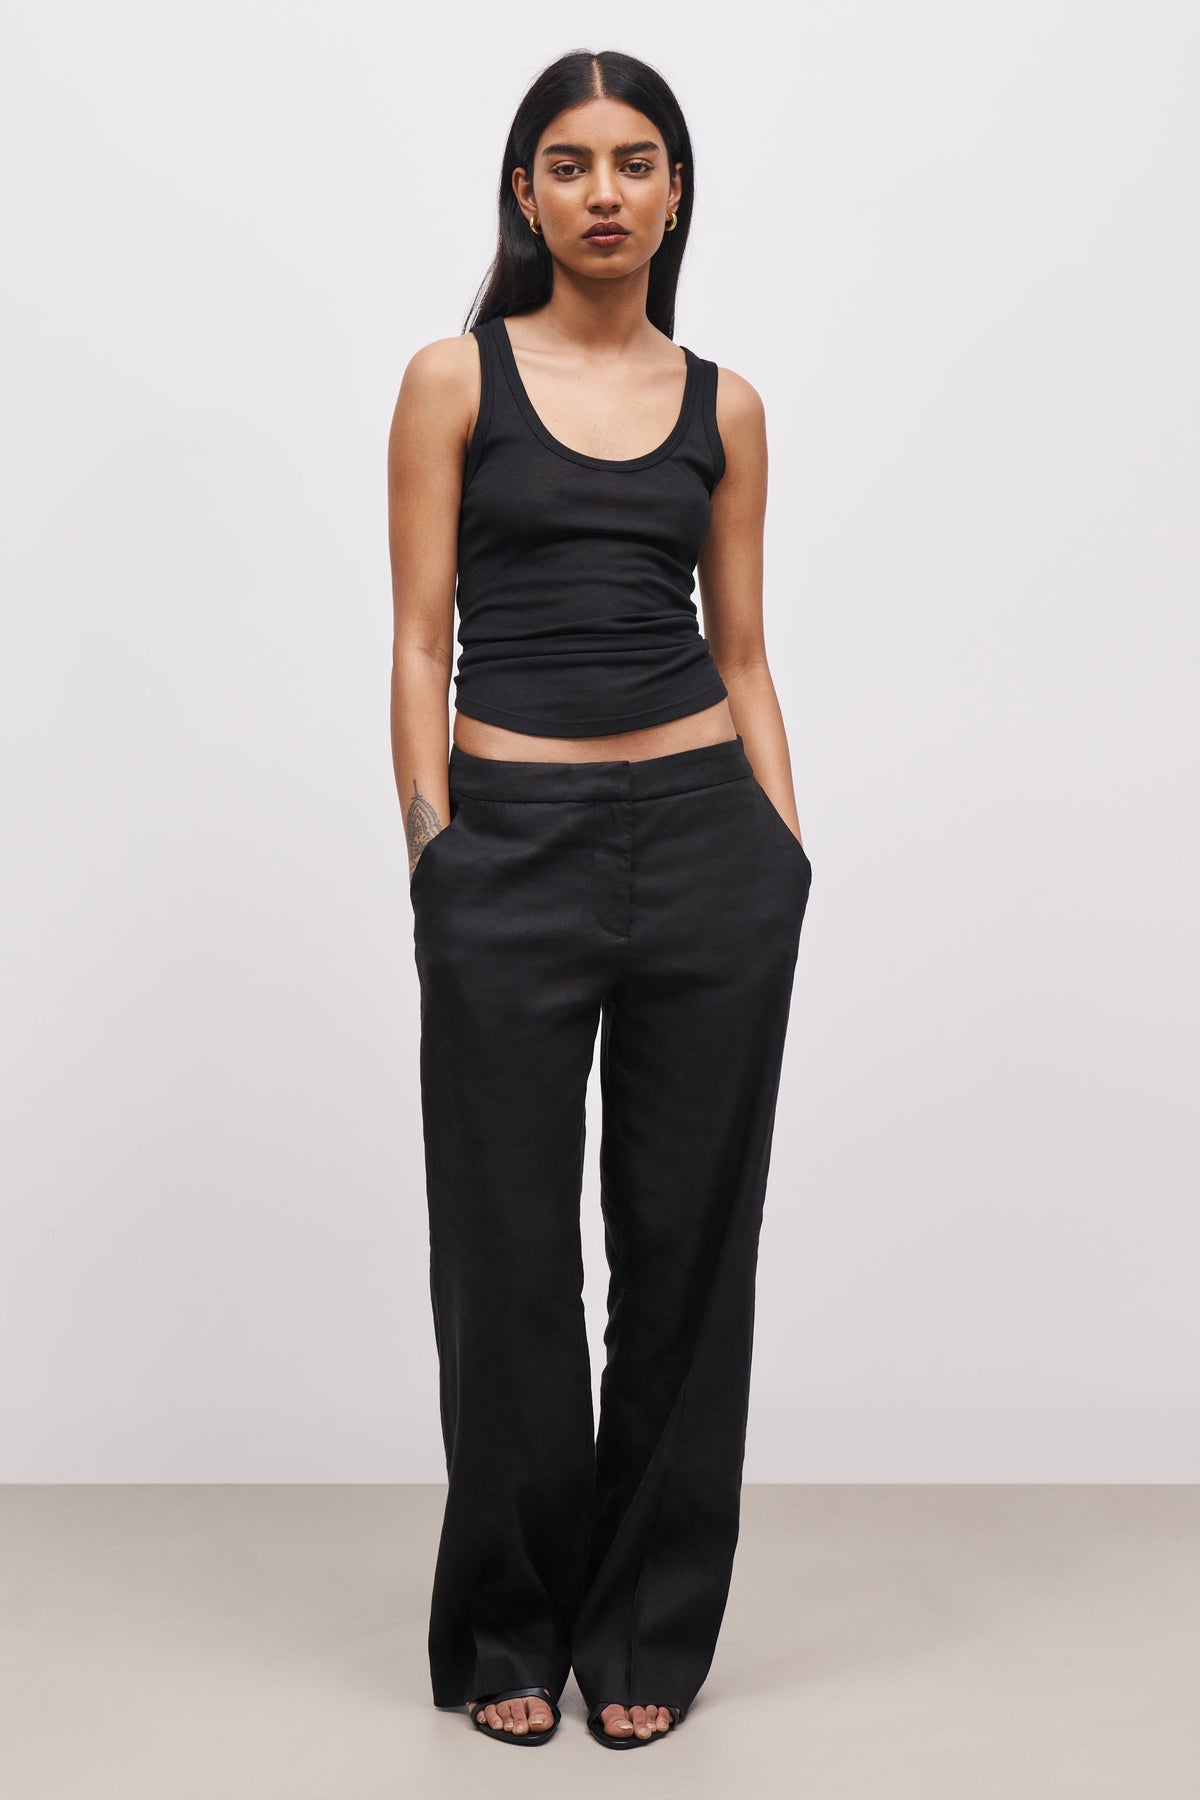 Tailored Linen Trousers - Black